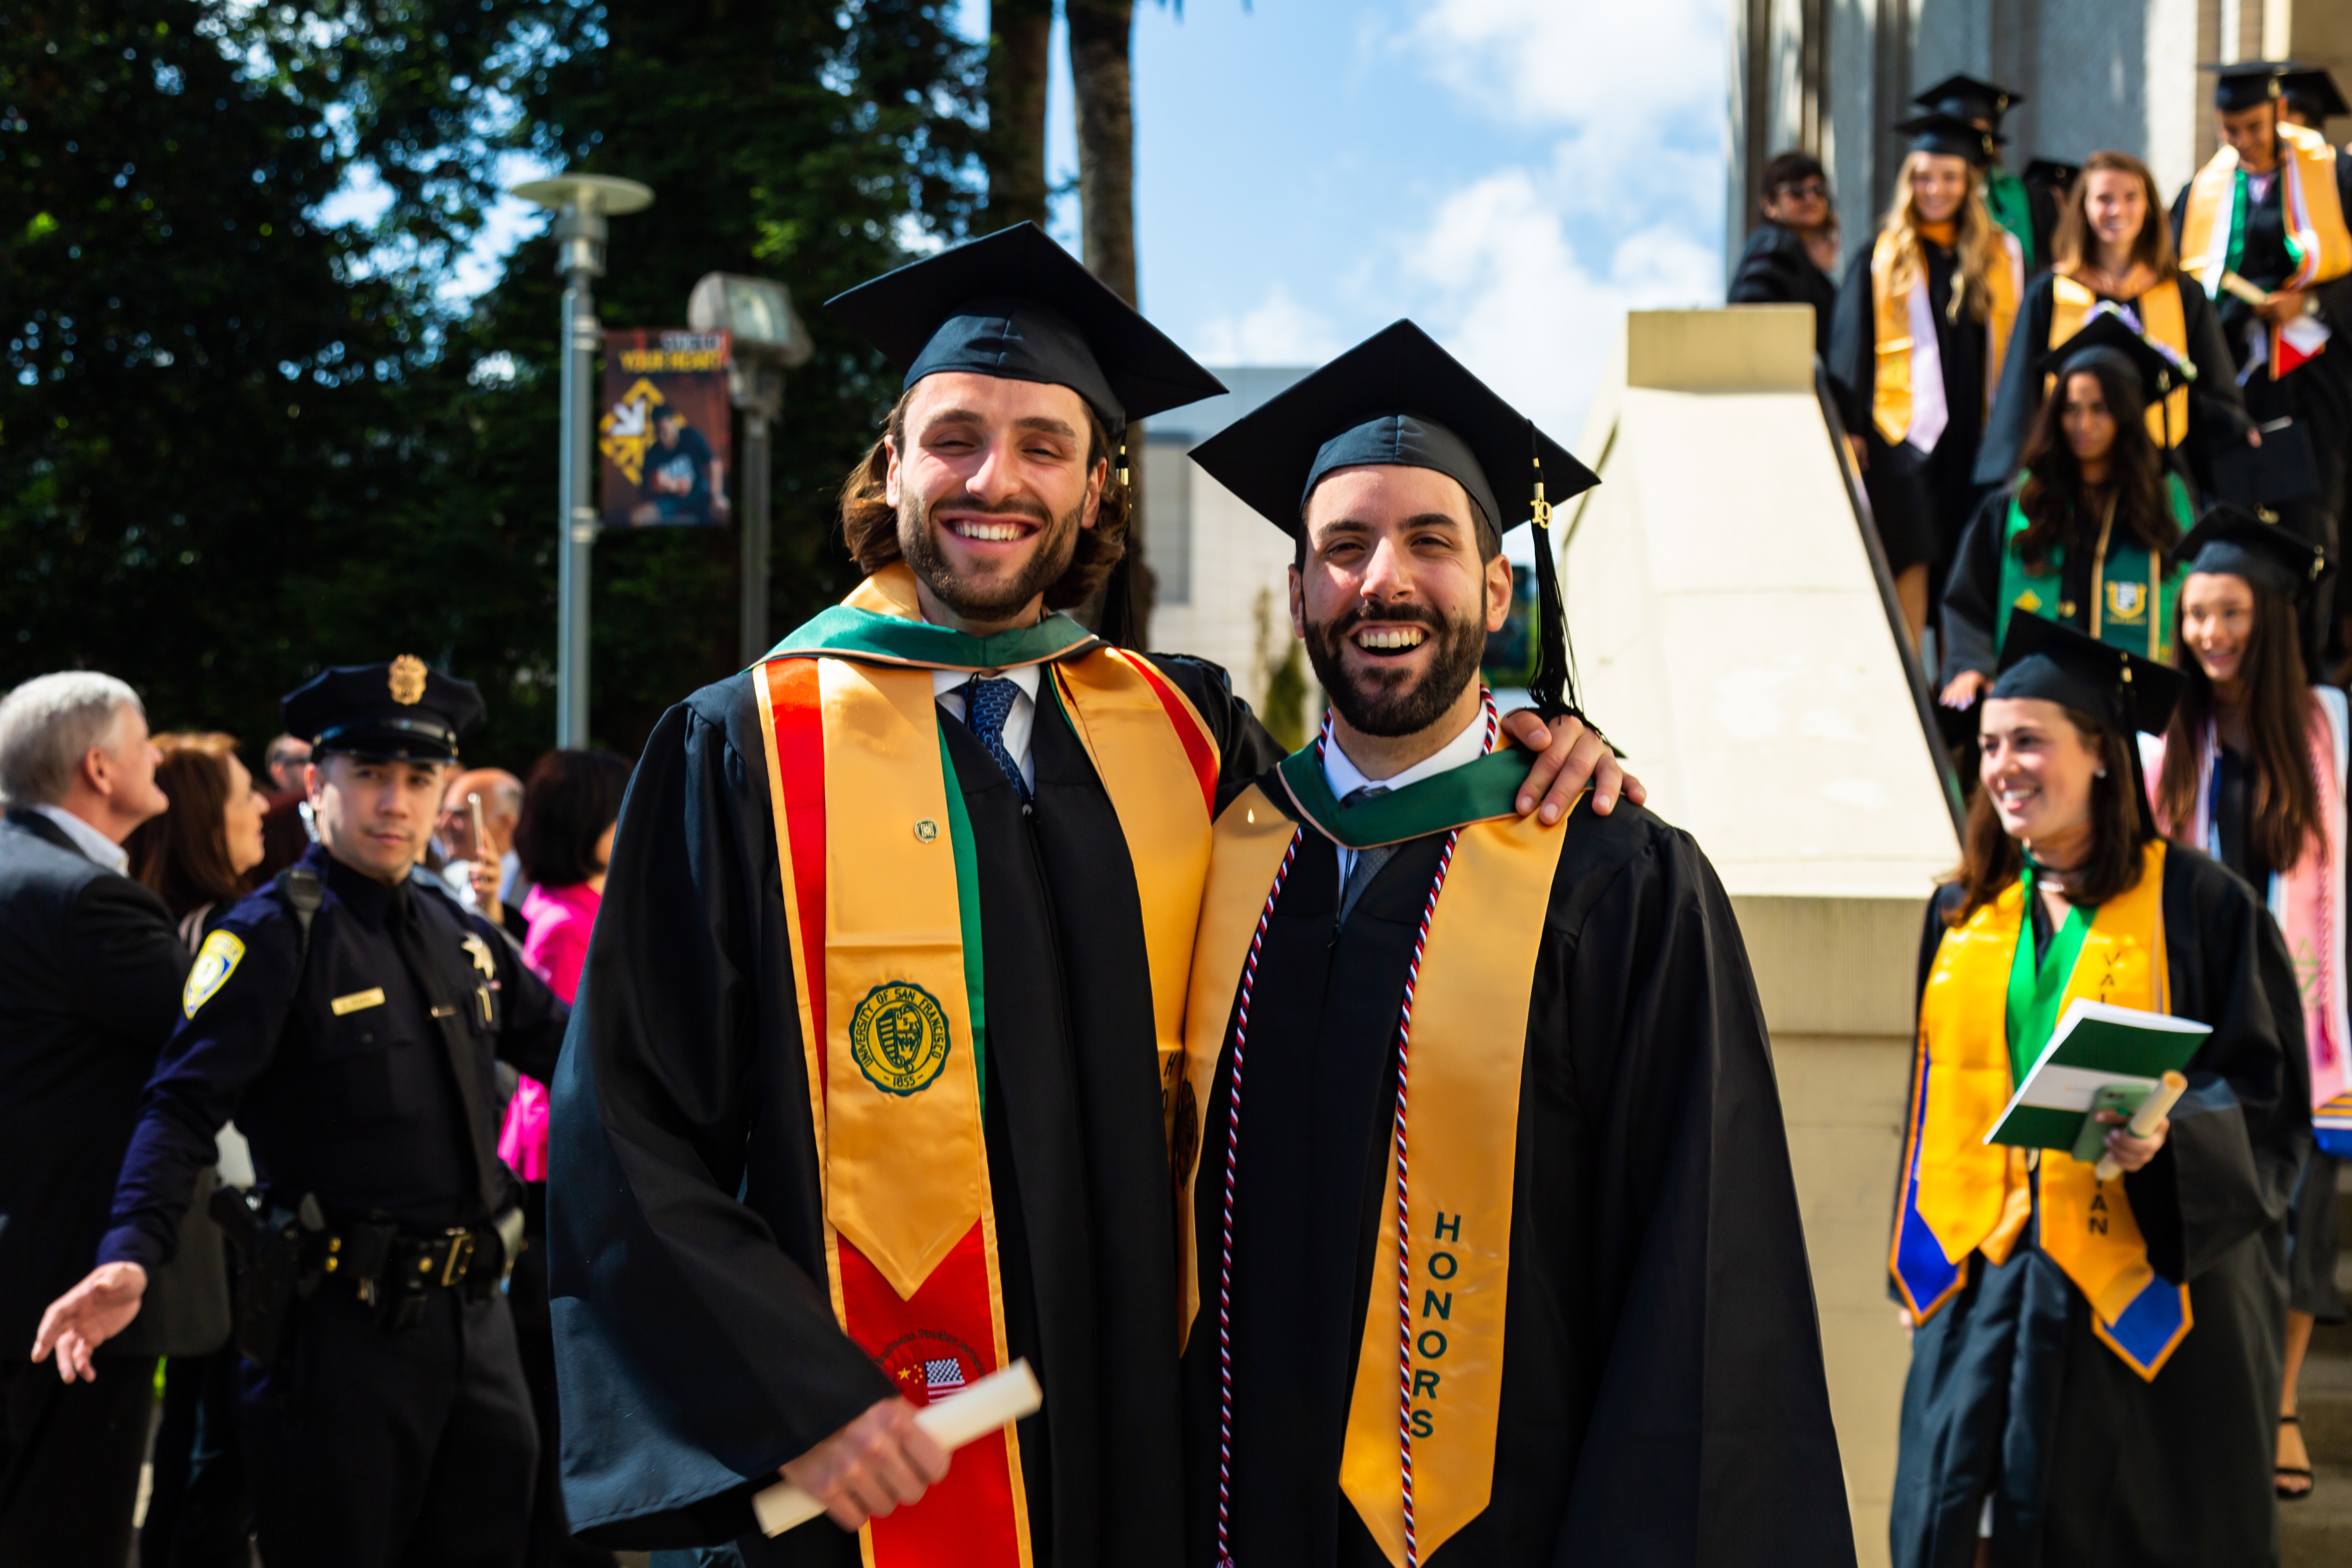 Two alumni posing in their graduation caps and stoles